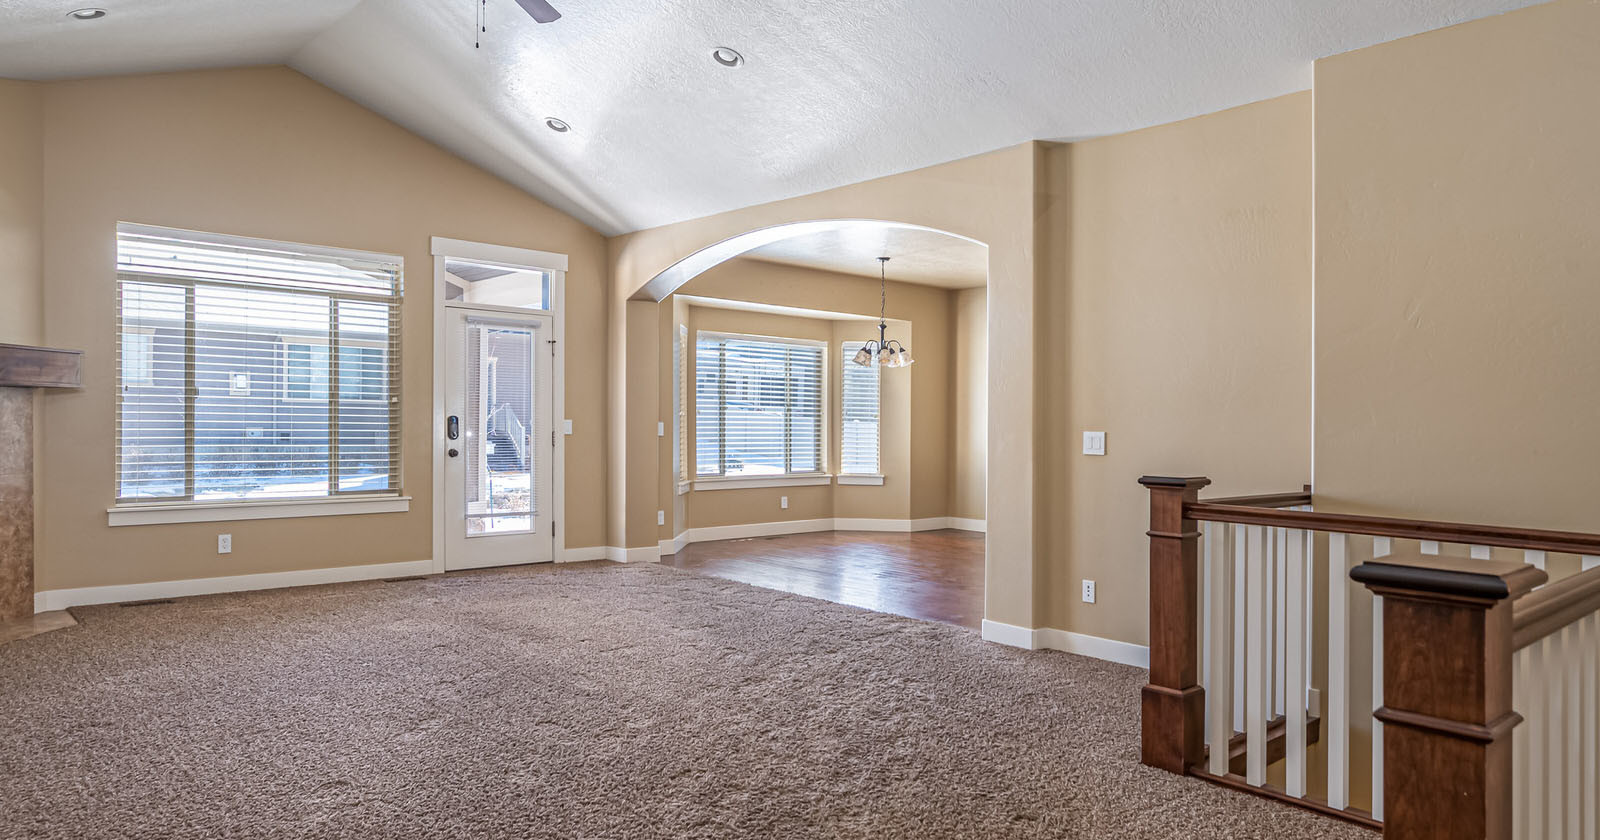 How to Shoot Real Estate Photos with HDR and Flash, From Start to Finish